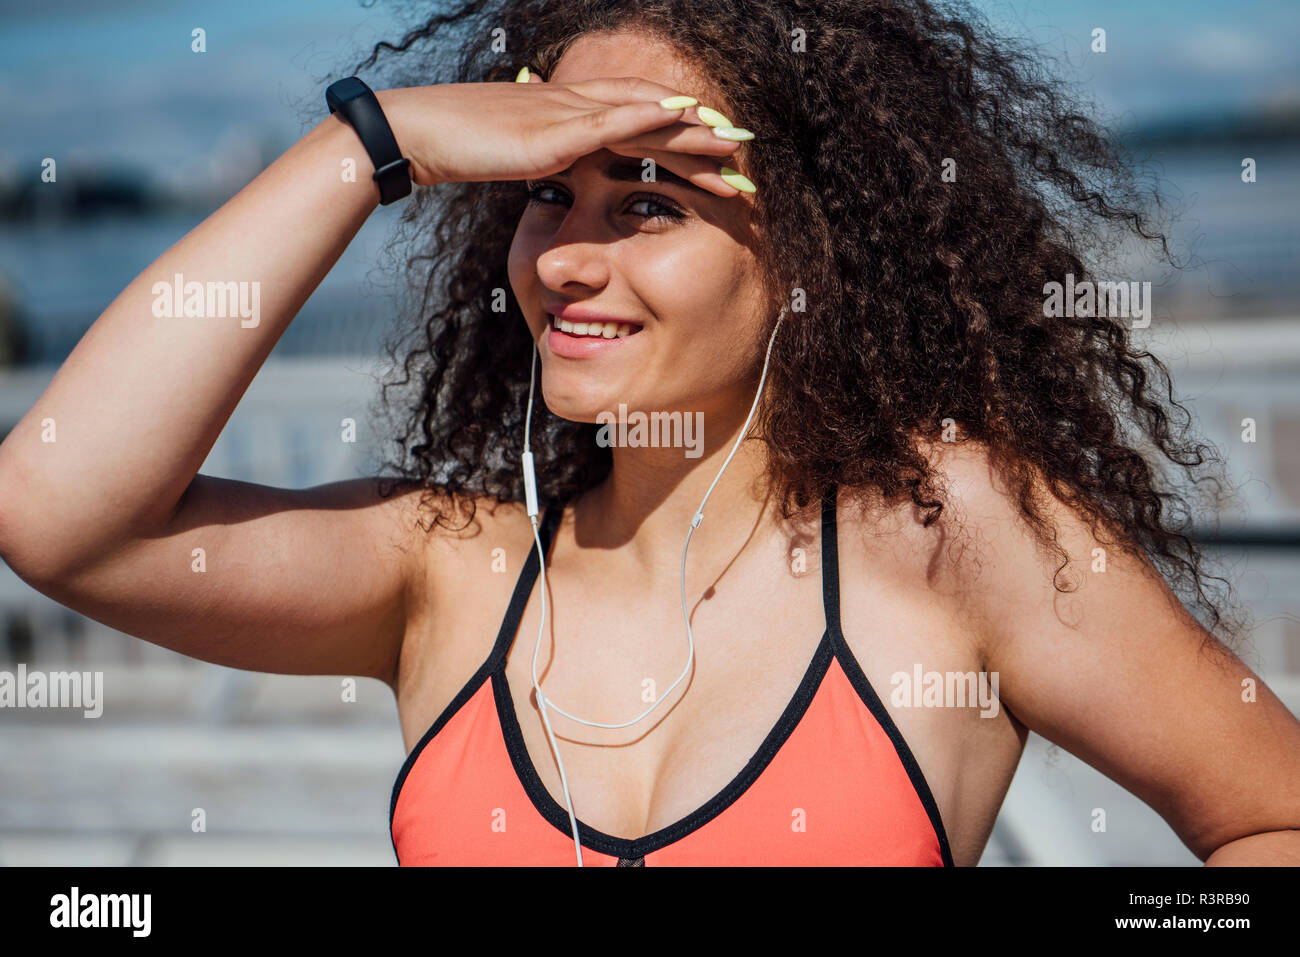 Portrait of smiling young athletic woman wearing bra outdoors Stock Photo